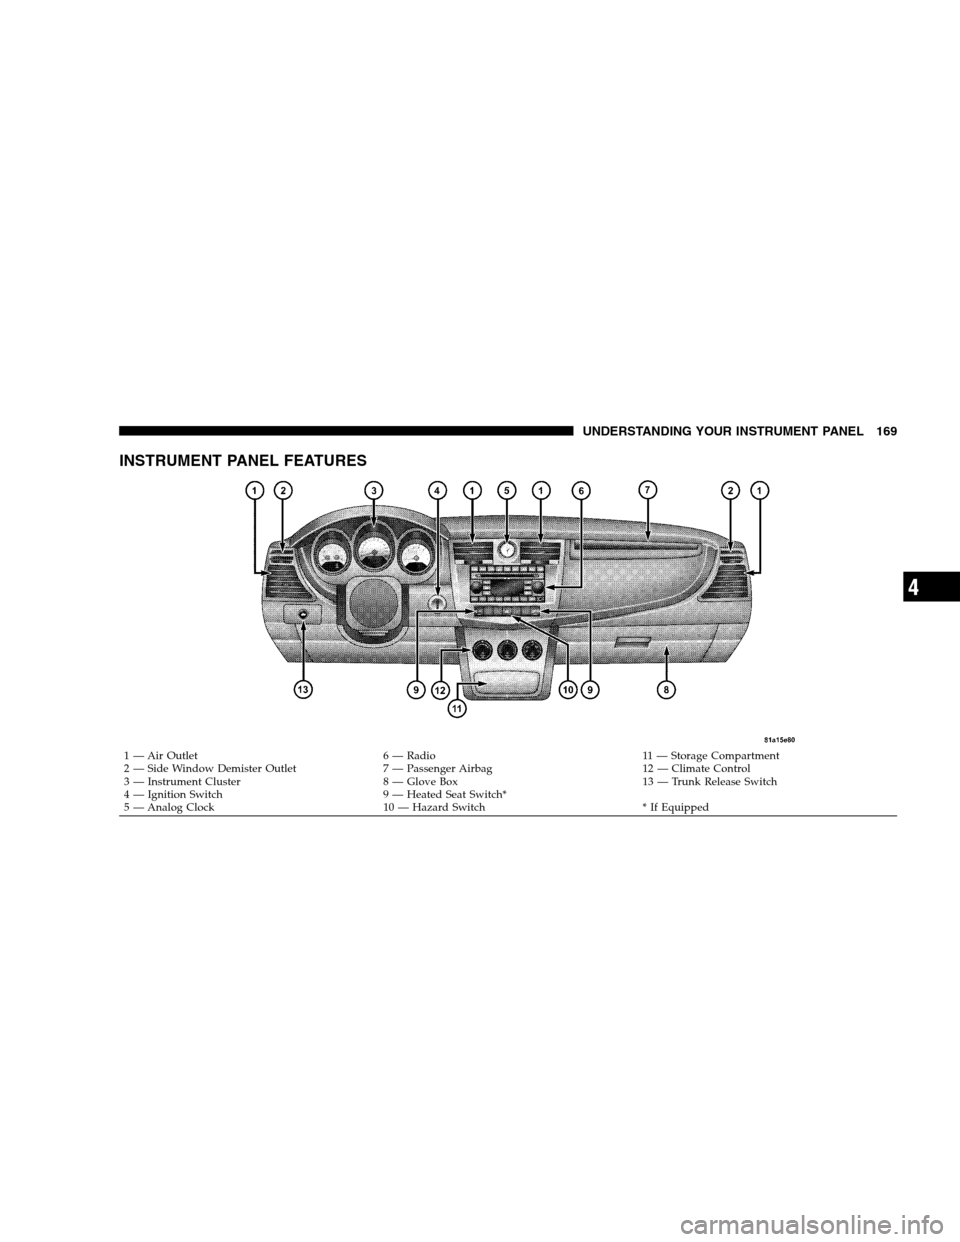 CHRYSLER SEBRING SEDAN 2008 3.G Owners Manual INSTRUMENT PANEL FEATURES
1 — Air Outlet 6 — Radio 11 — Storage Compartment
2 — Side Window Demister Outlet 7 — Passenger Airbag 12 — Climate Control
3 — Instrument Cluster 8 — Glove B